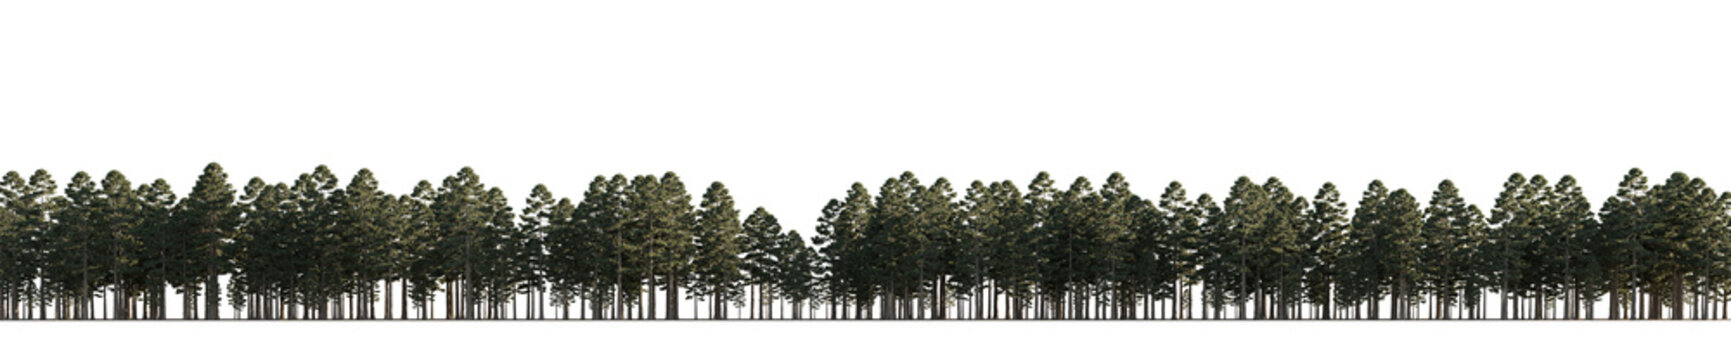 isolated conifer trees pinus ponderosa, best use for image background